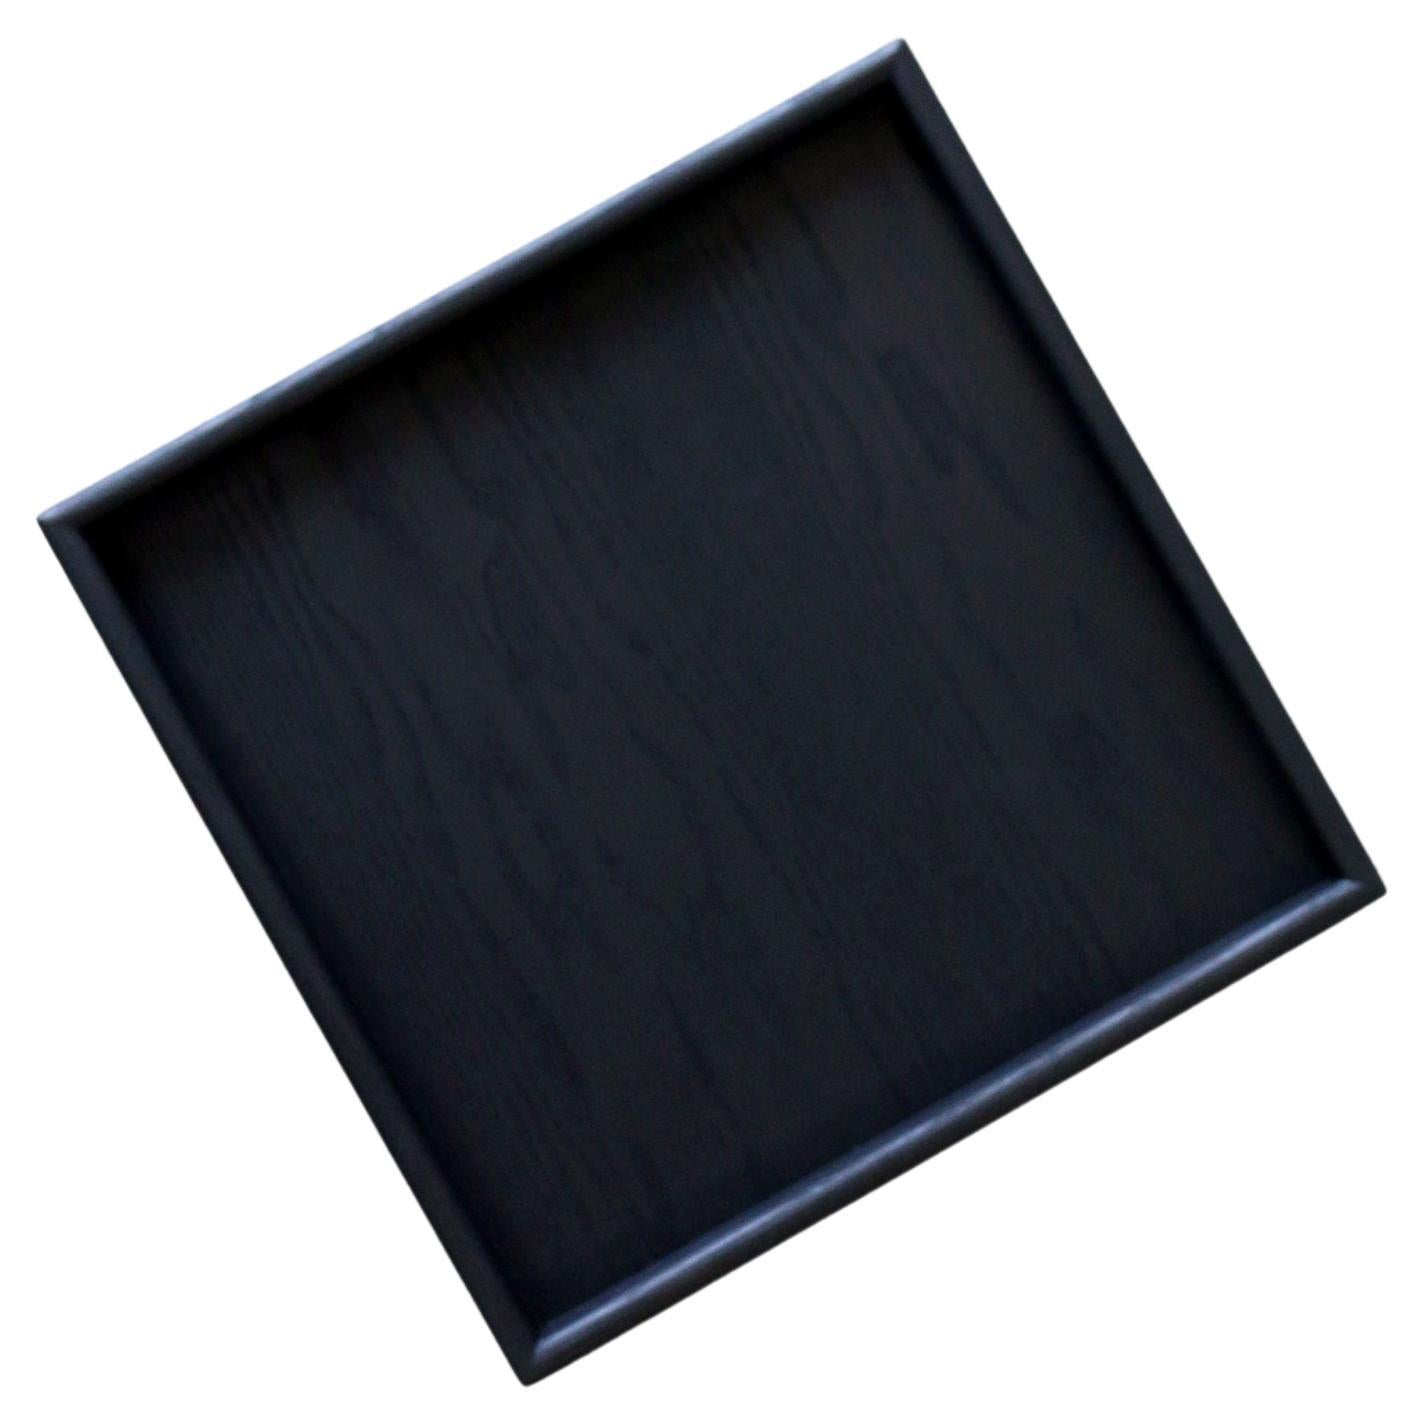 Handmade Square Black Wooden Serving Tray